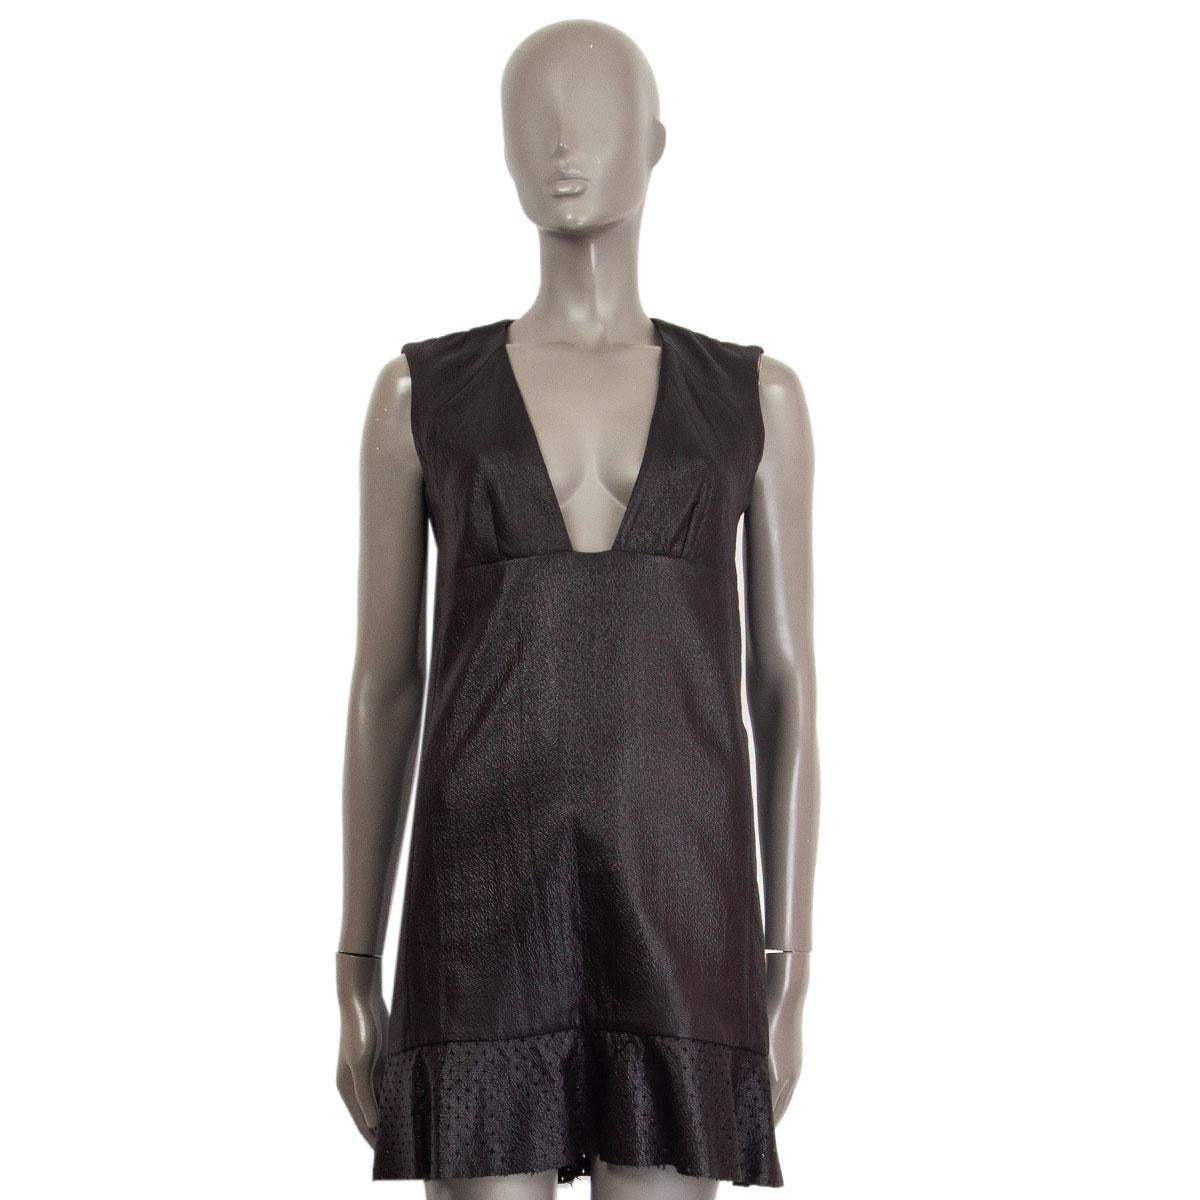 100% authentic Balenciaga sleeveless leather effect dress in black cotton (48%), acetate (39%) and polyamide (13%) with a wide decolleté cut and a perforated-band detail at the bottom-hem. Closes with an hook and an invisible zipper on the back.